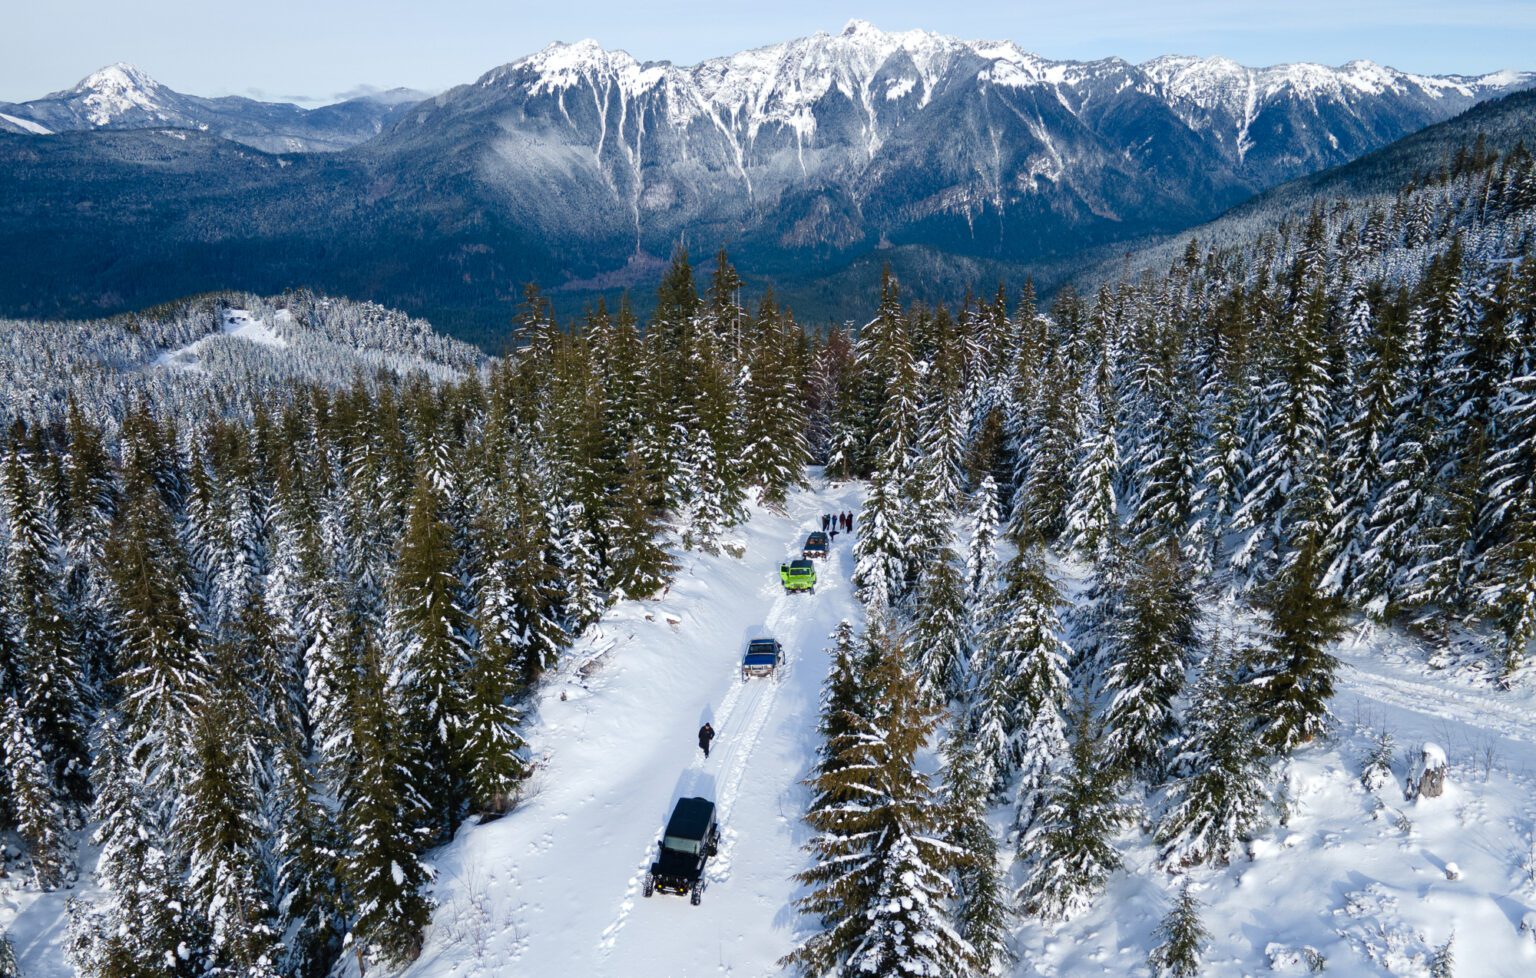 The Rainier Ridge Rams reach a stopping point while exploring a snowy logging road outside of Glacier leaving a trail of tiretrucks.